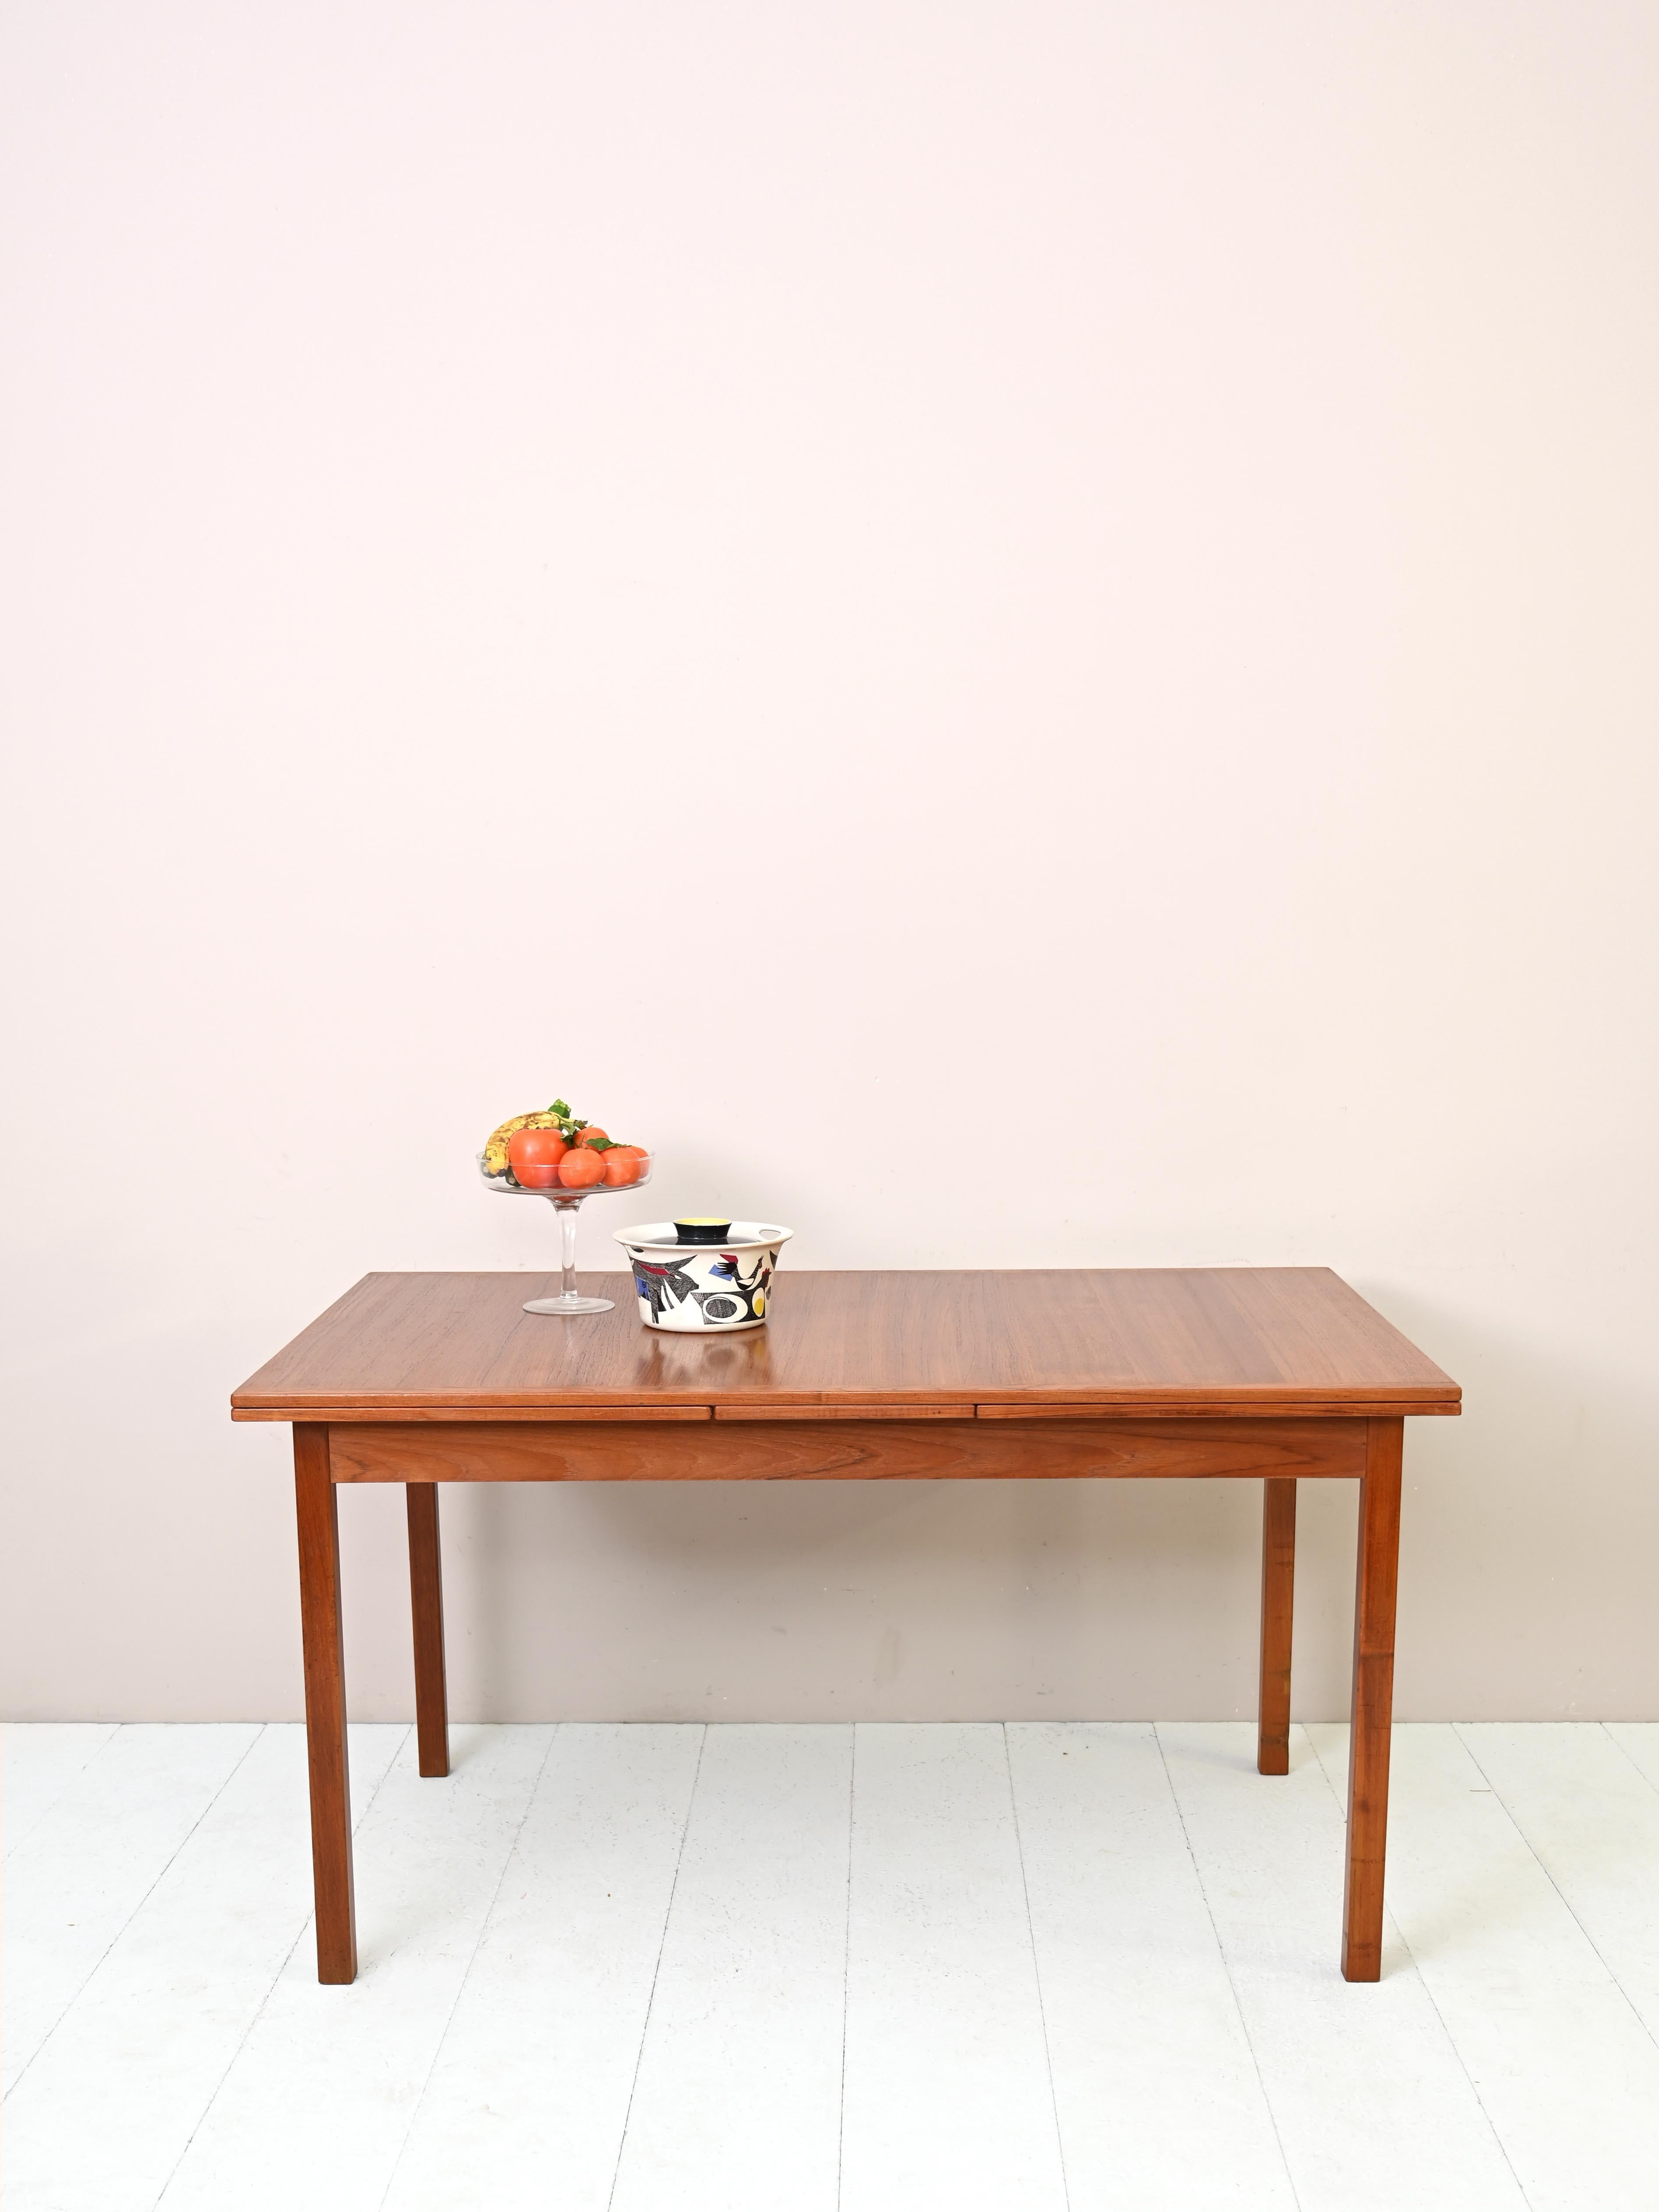 Scandinavian 1960s teak dining table.
 
DIMENSIONS OF PLANKS: 2 X 55cm

A Nordic design piece of furniture with regular, square lines. It can be extended thanks to the two retractable side planks that can be used when needed.
An effective way to